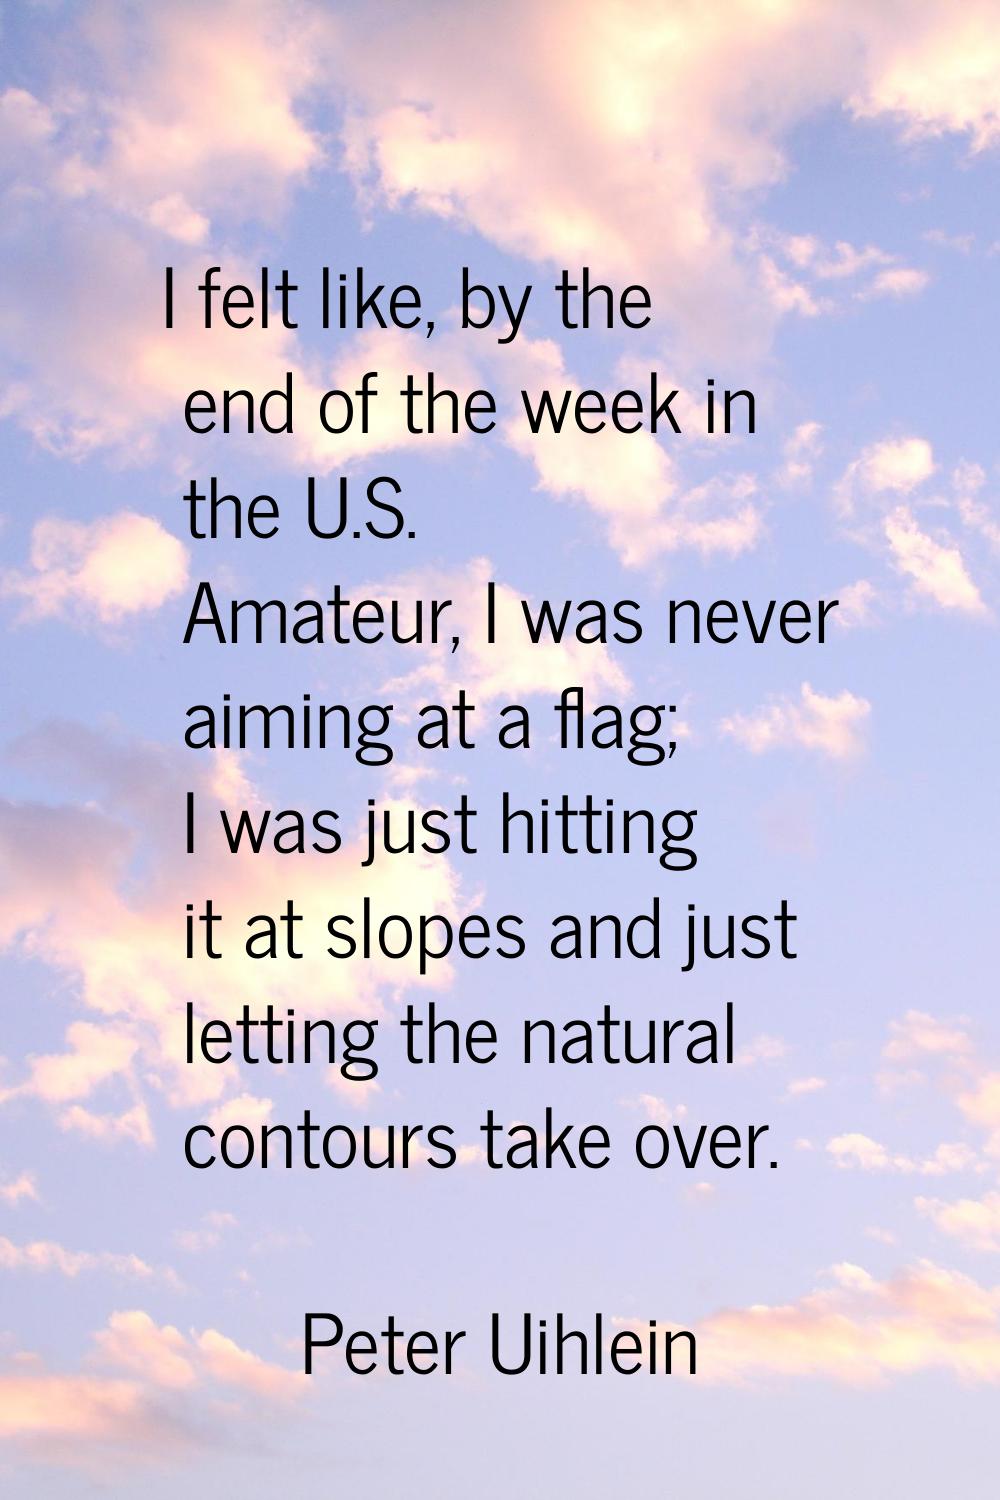 I felt like, by the end of the week in the U.S. Amateur, I was never aiming at a flag; I was just h